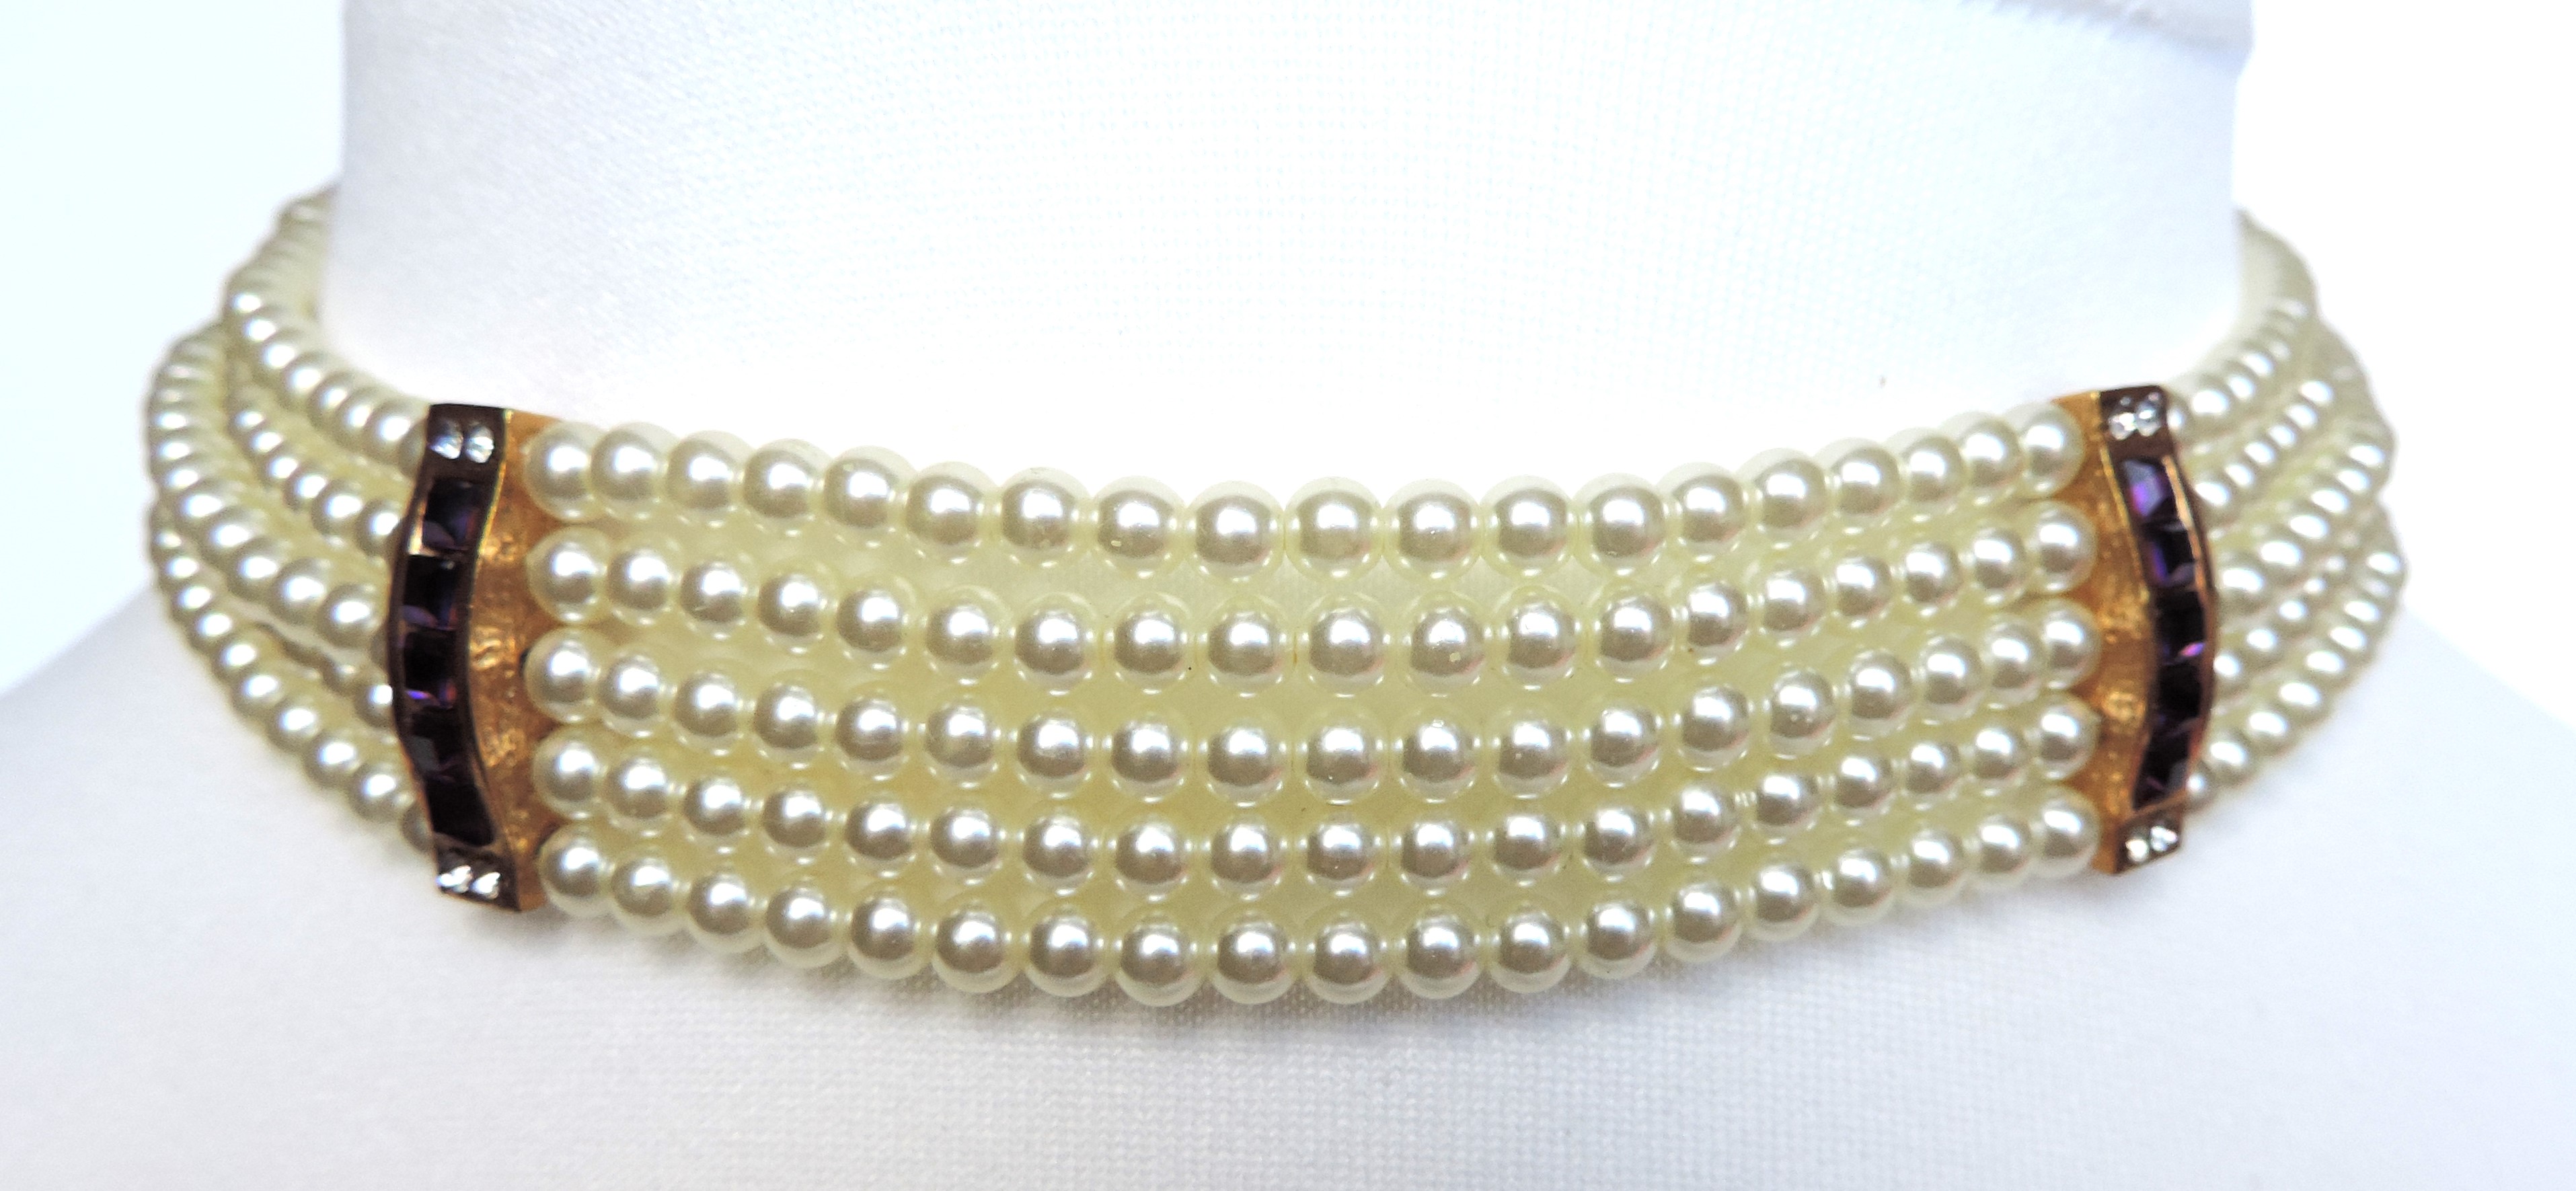 Five Strand Pearl Choker Necklace New with Gift Box - Image 4 of 4